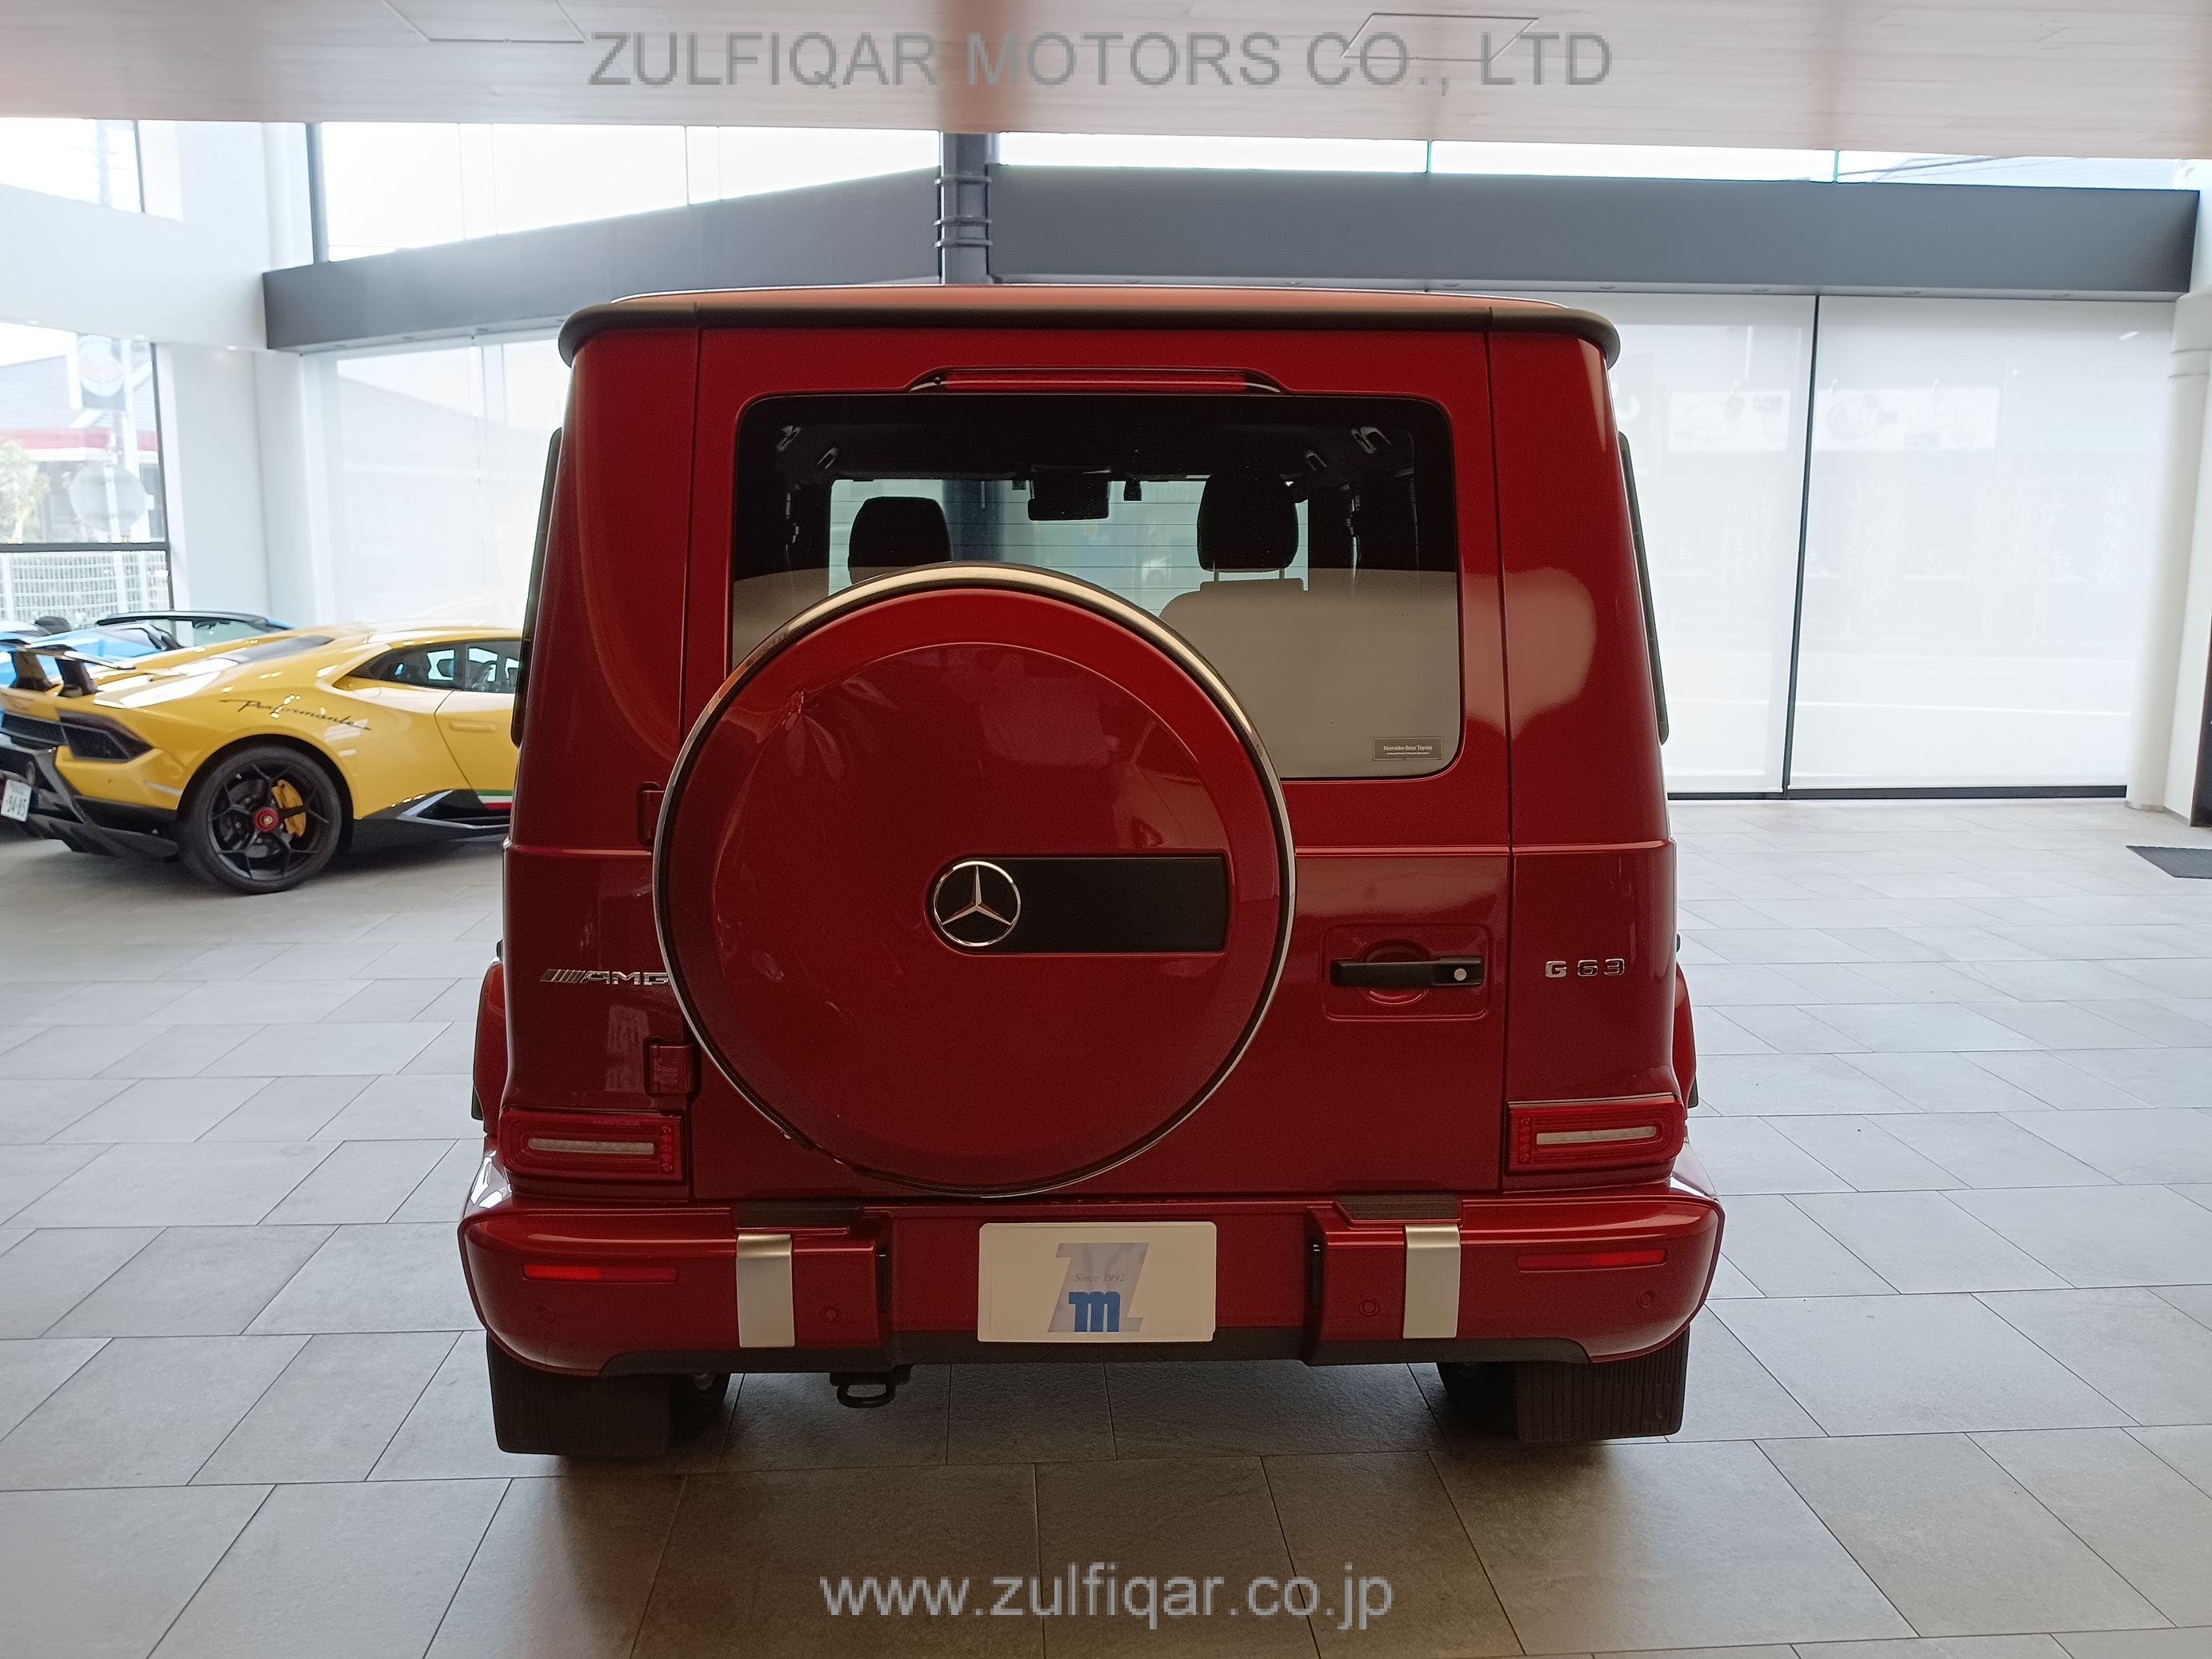 MERCEDES AMG G CLASS 2019 Image 29